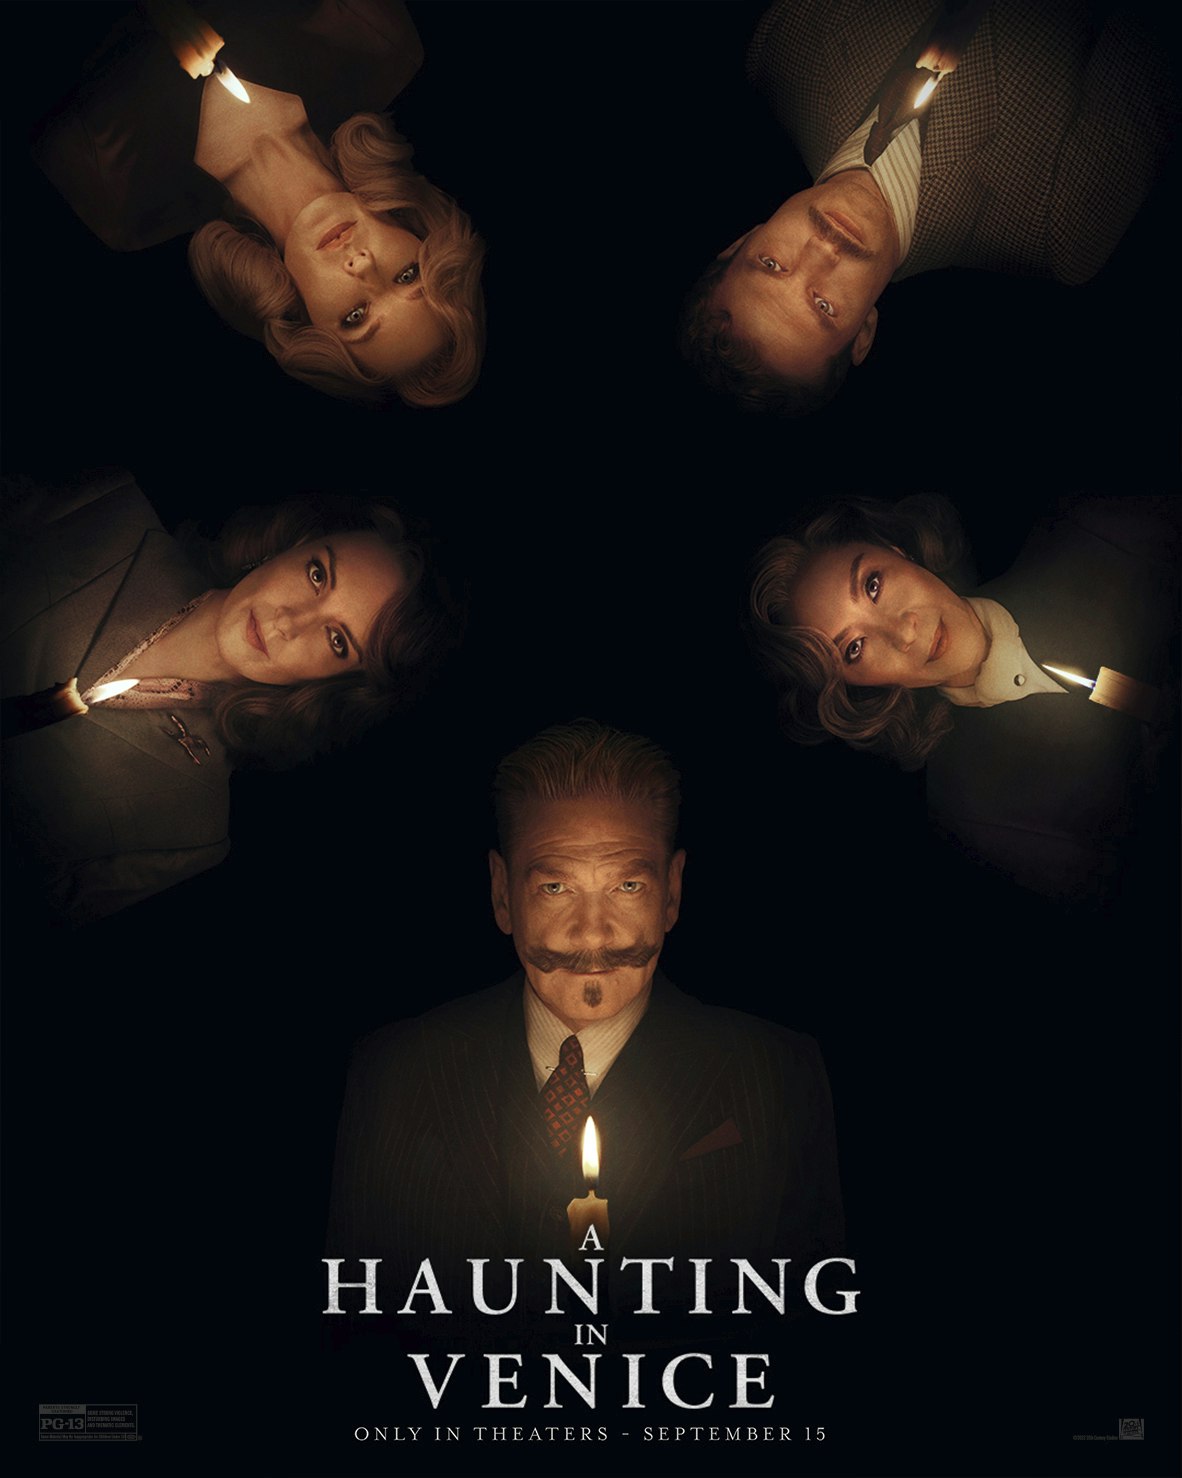 A Haunting in Venice - Film Poster Harkins Image